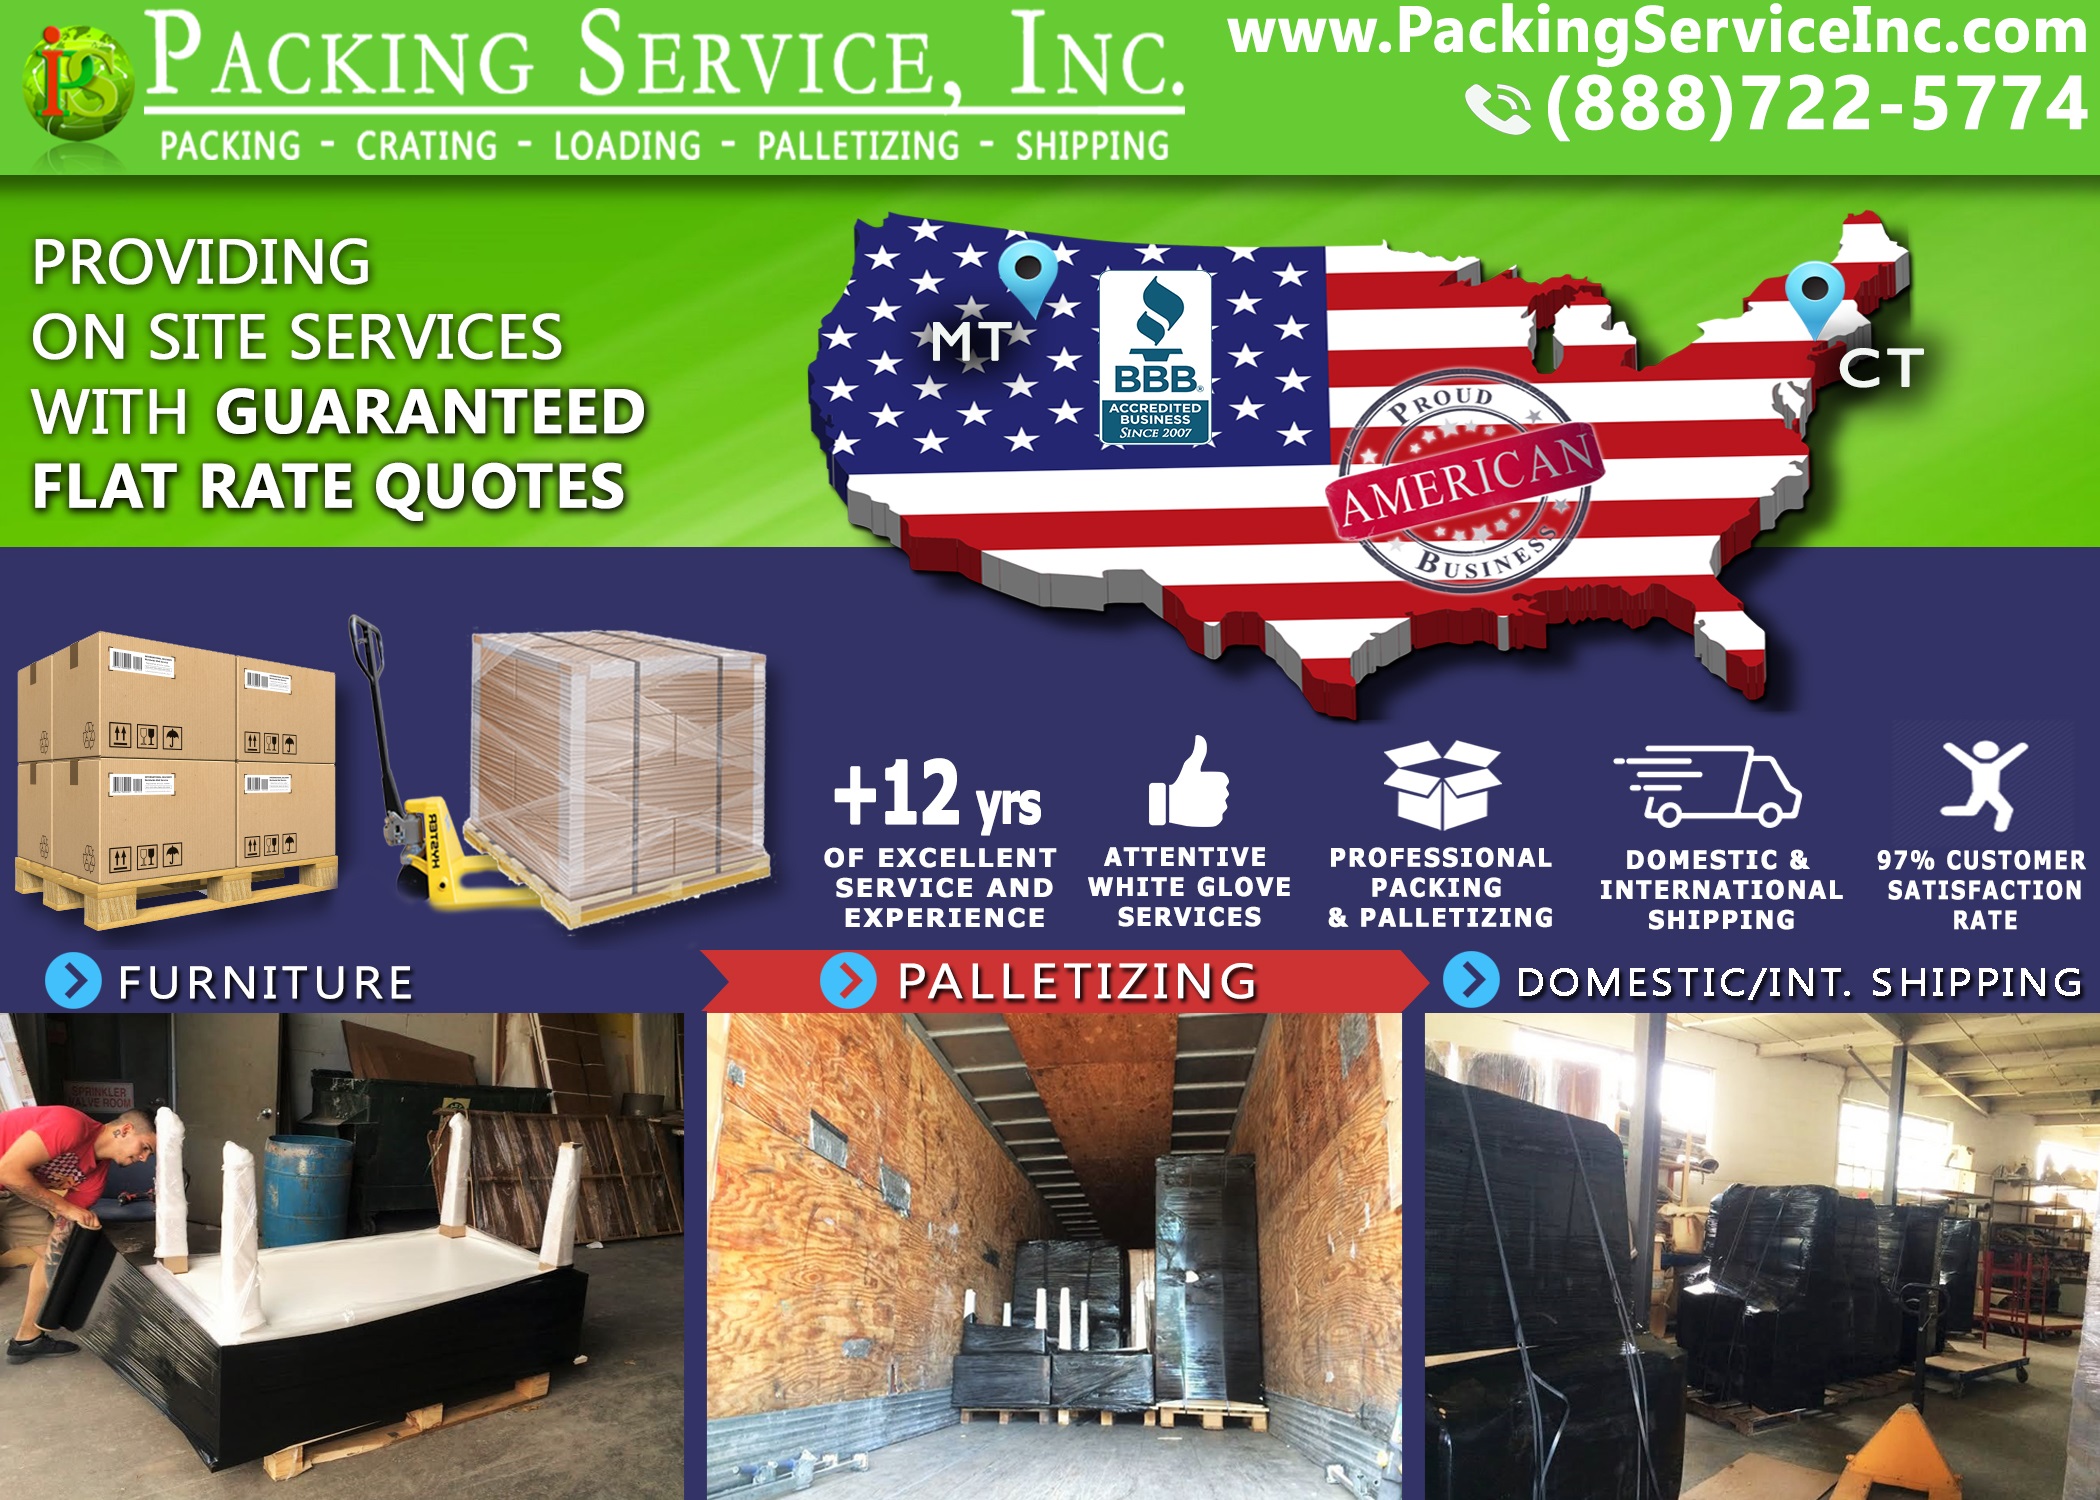 wrapping-new-furniture-palletizing-and-shipping-from-conneticut-to-montana-with-packing-service-inc-597